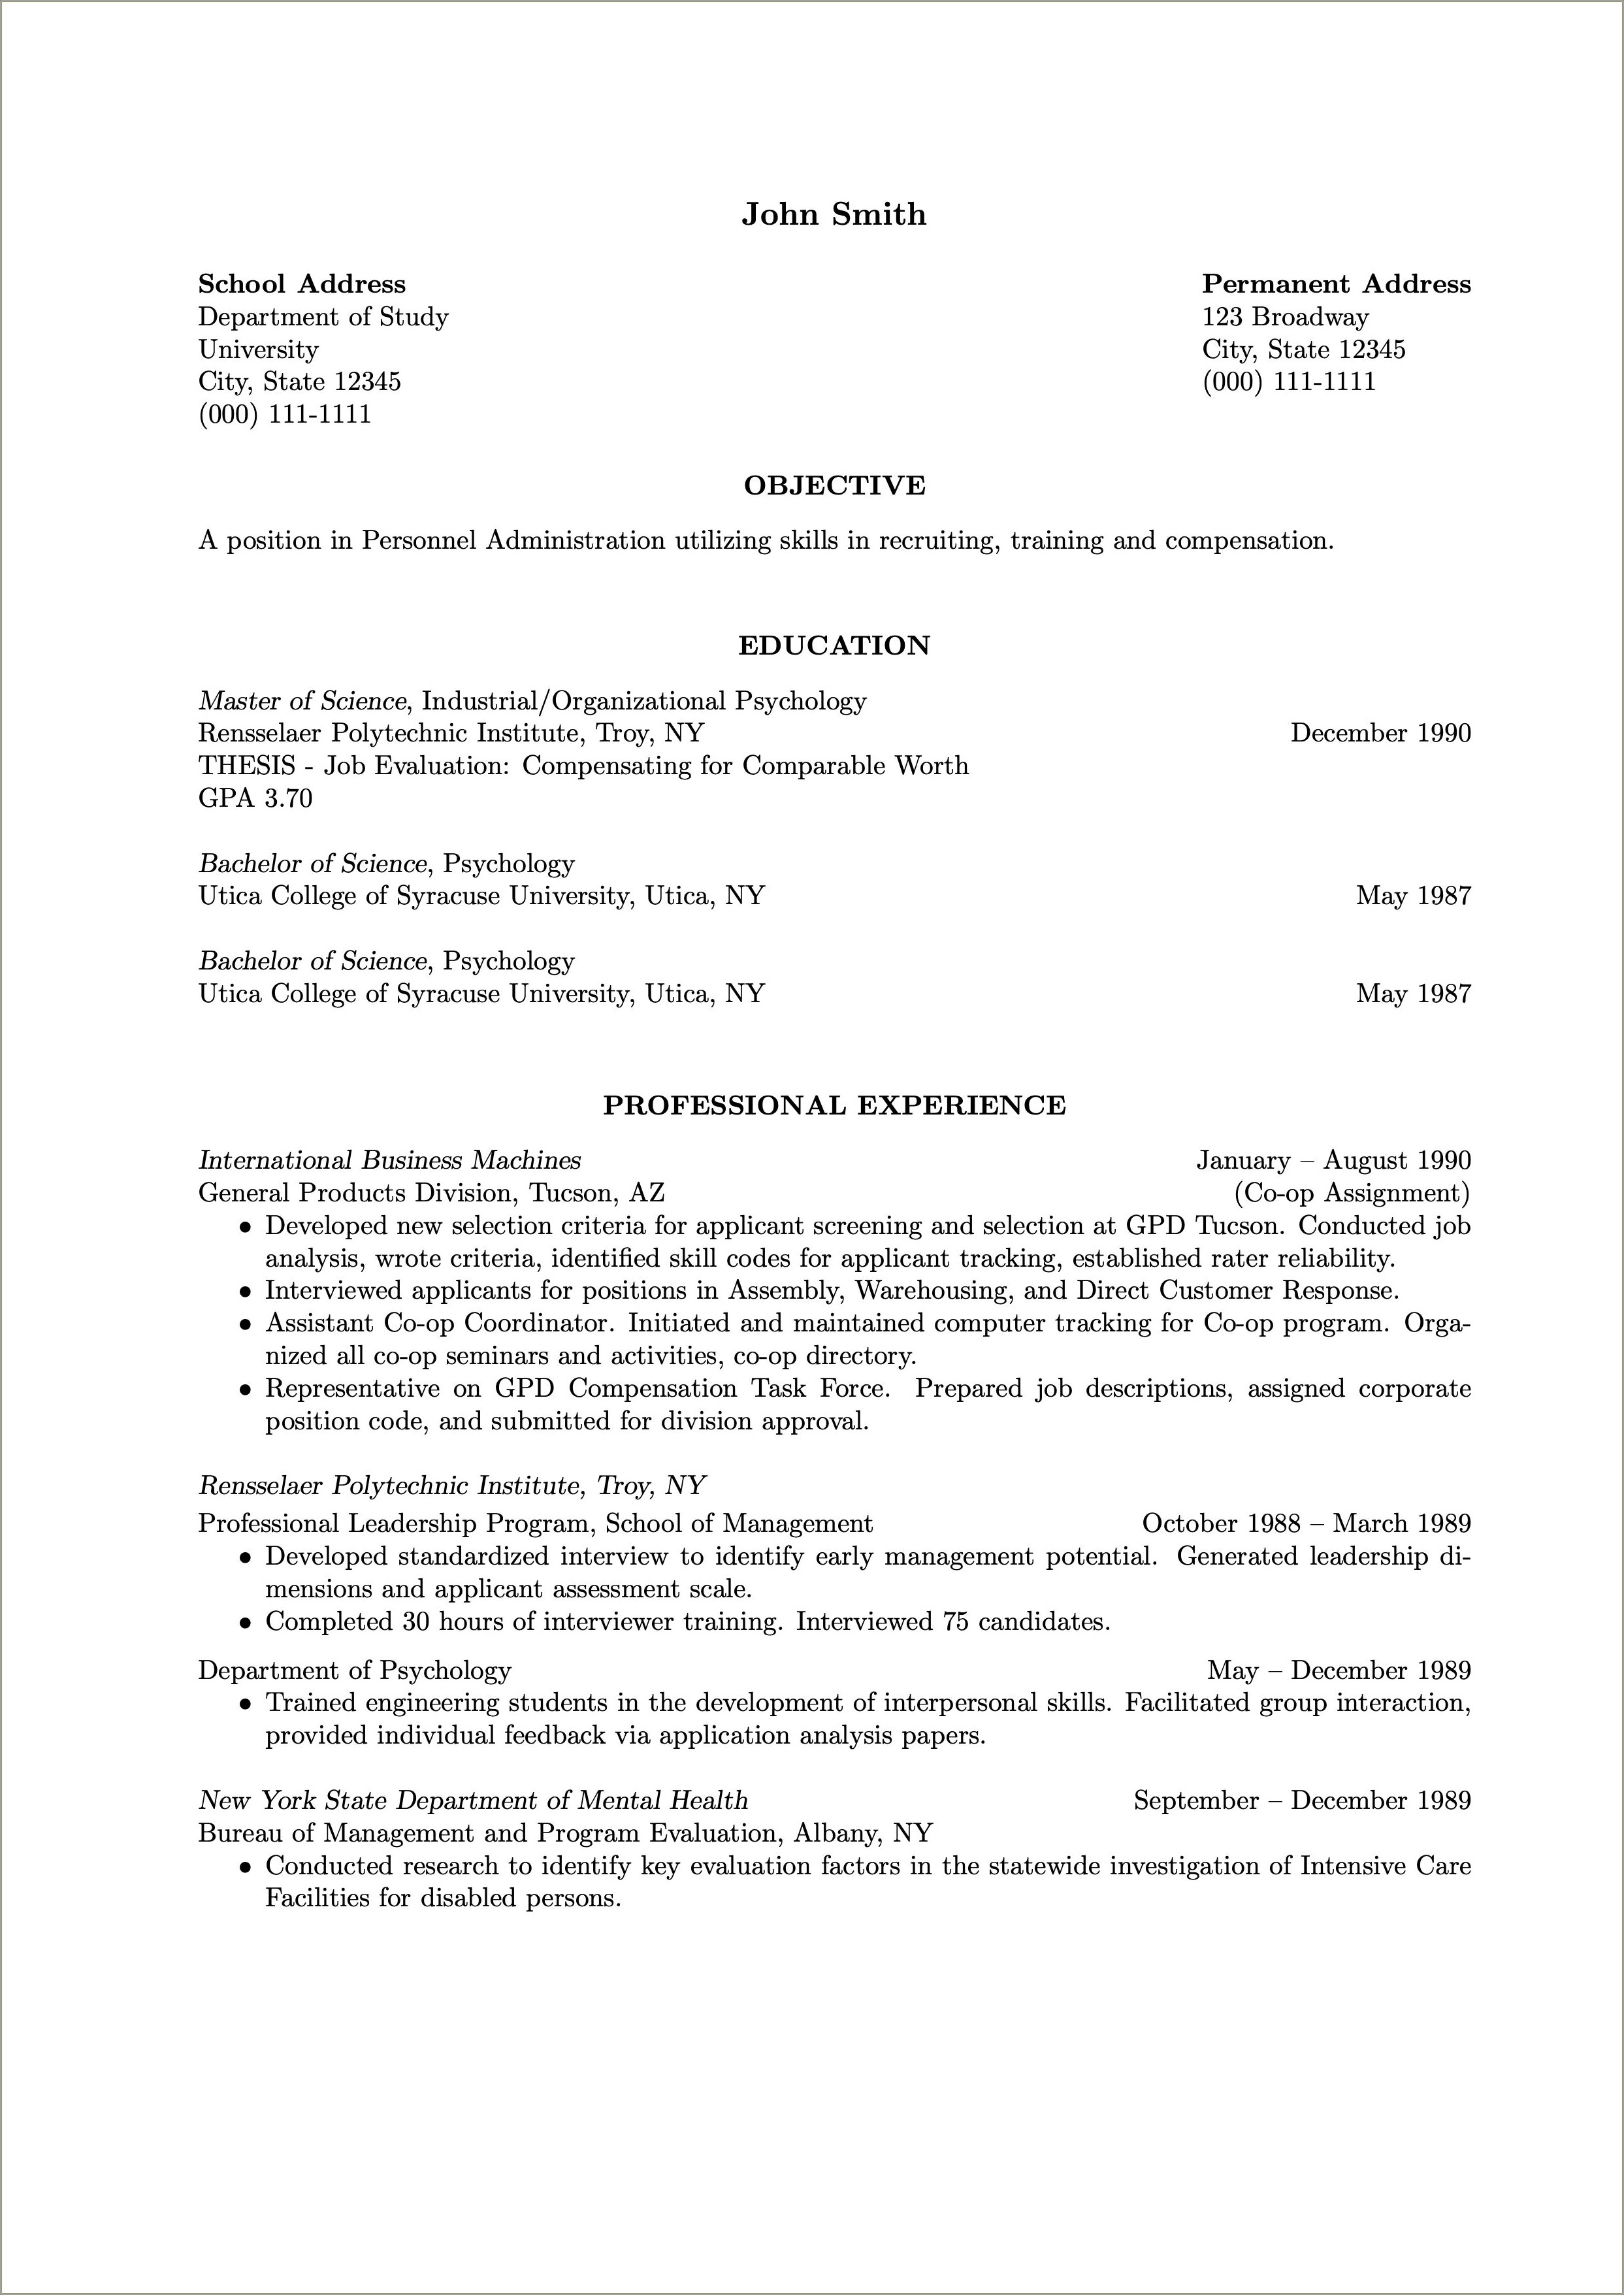 Resume Career Objective For Applied Physical Science